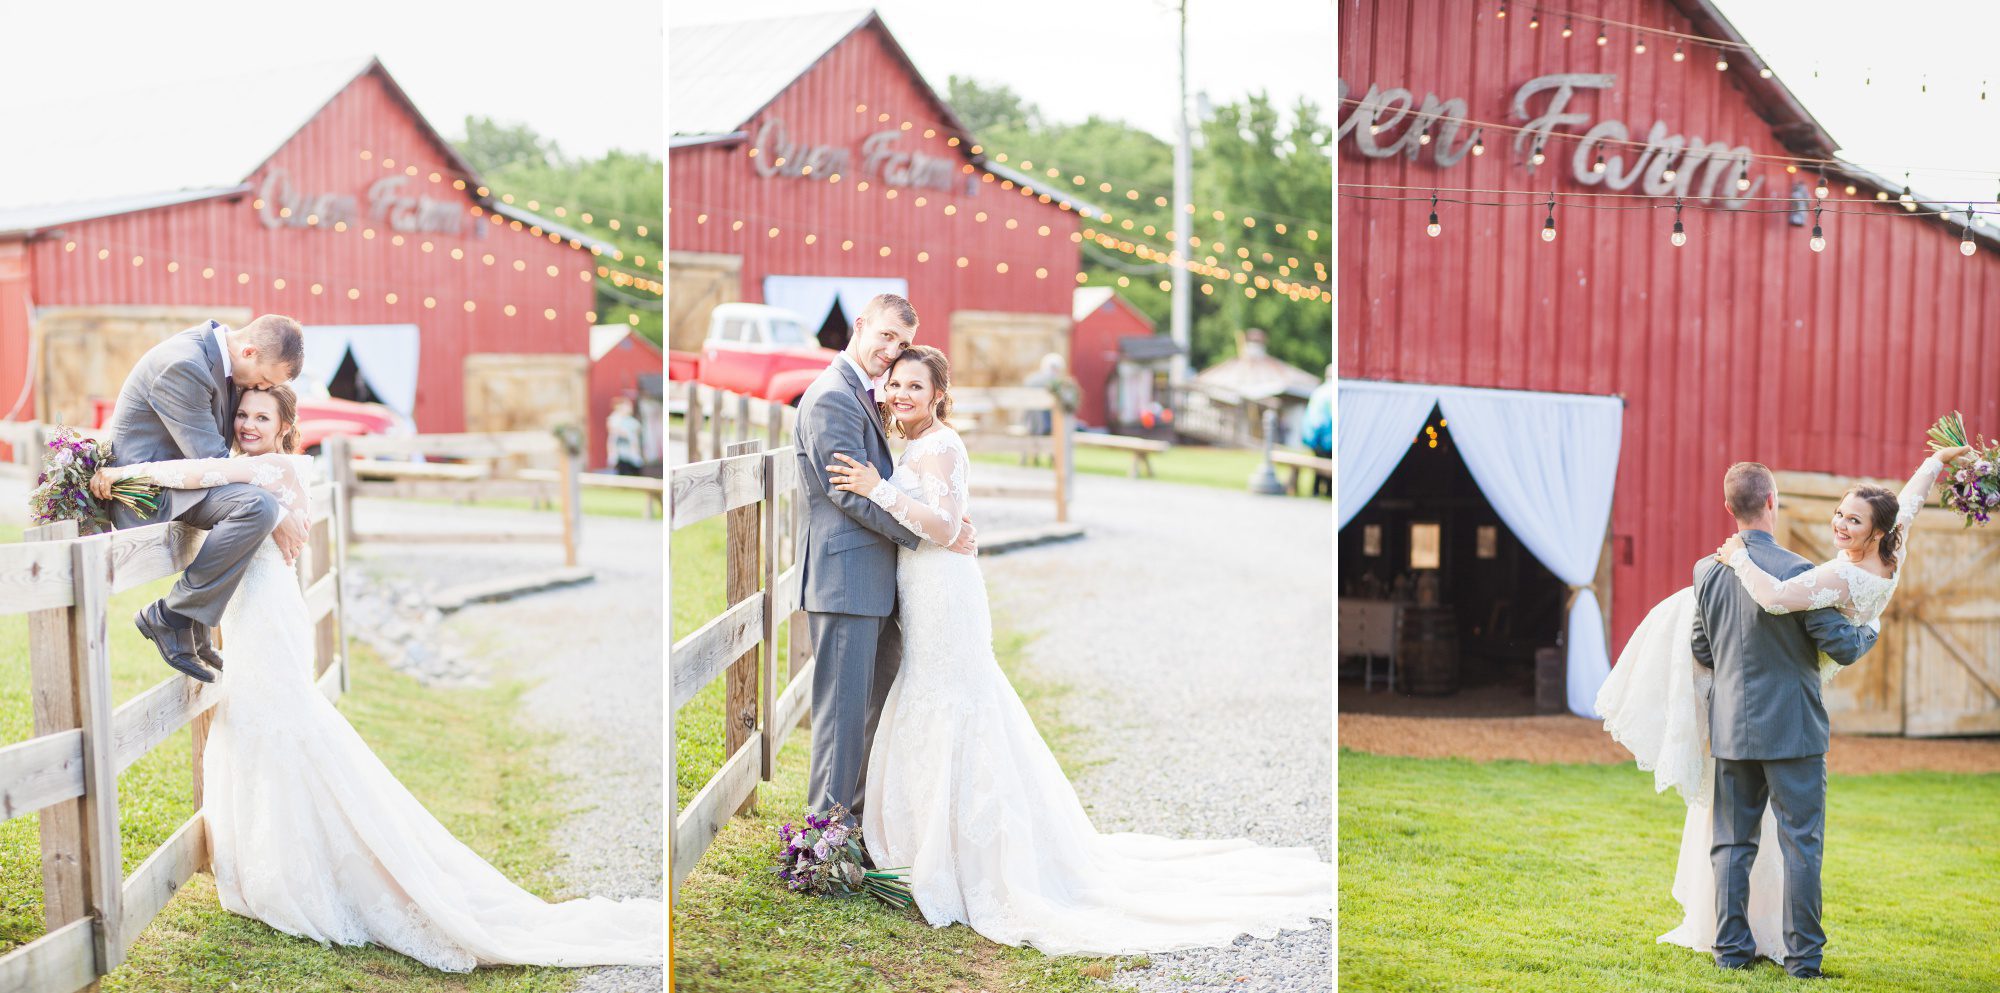 Bride and groom in front of barn at summer wedding at Owen Farm in Chapmansboro, TN. Photography by Krista Lee Photography. 